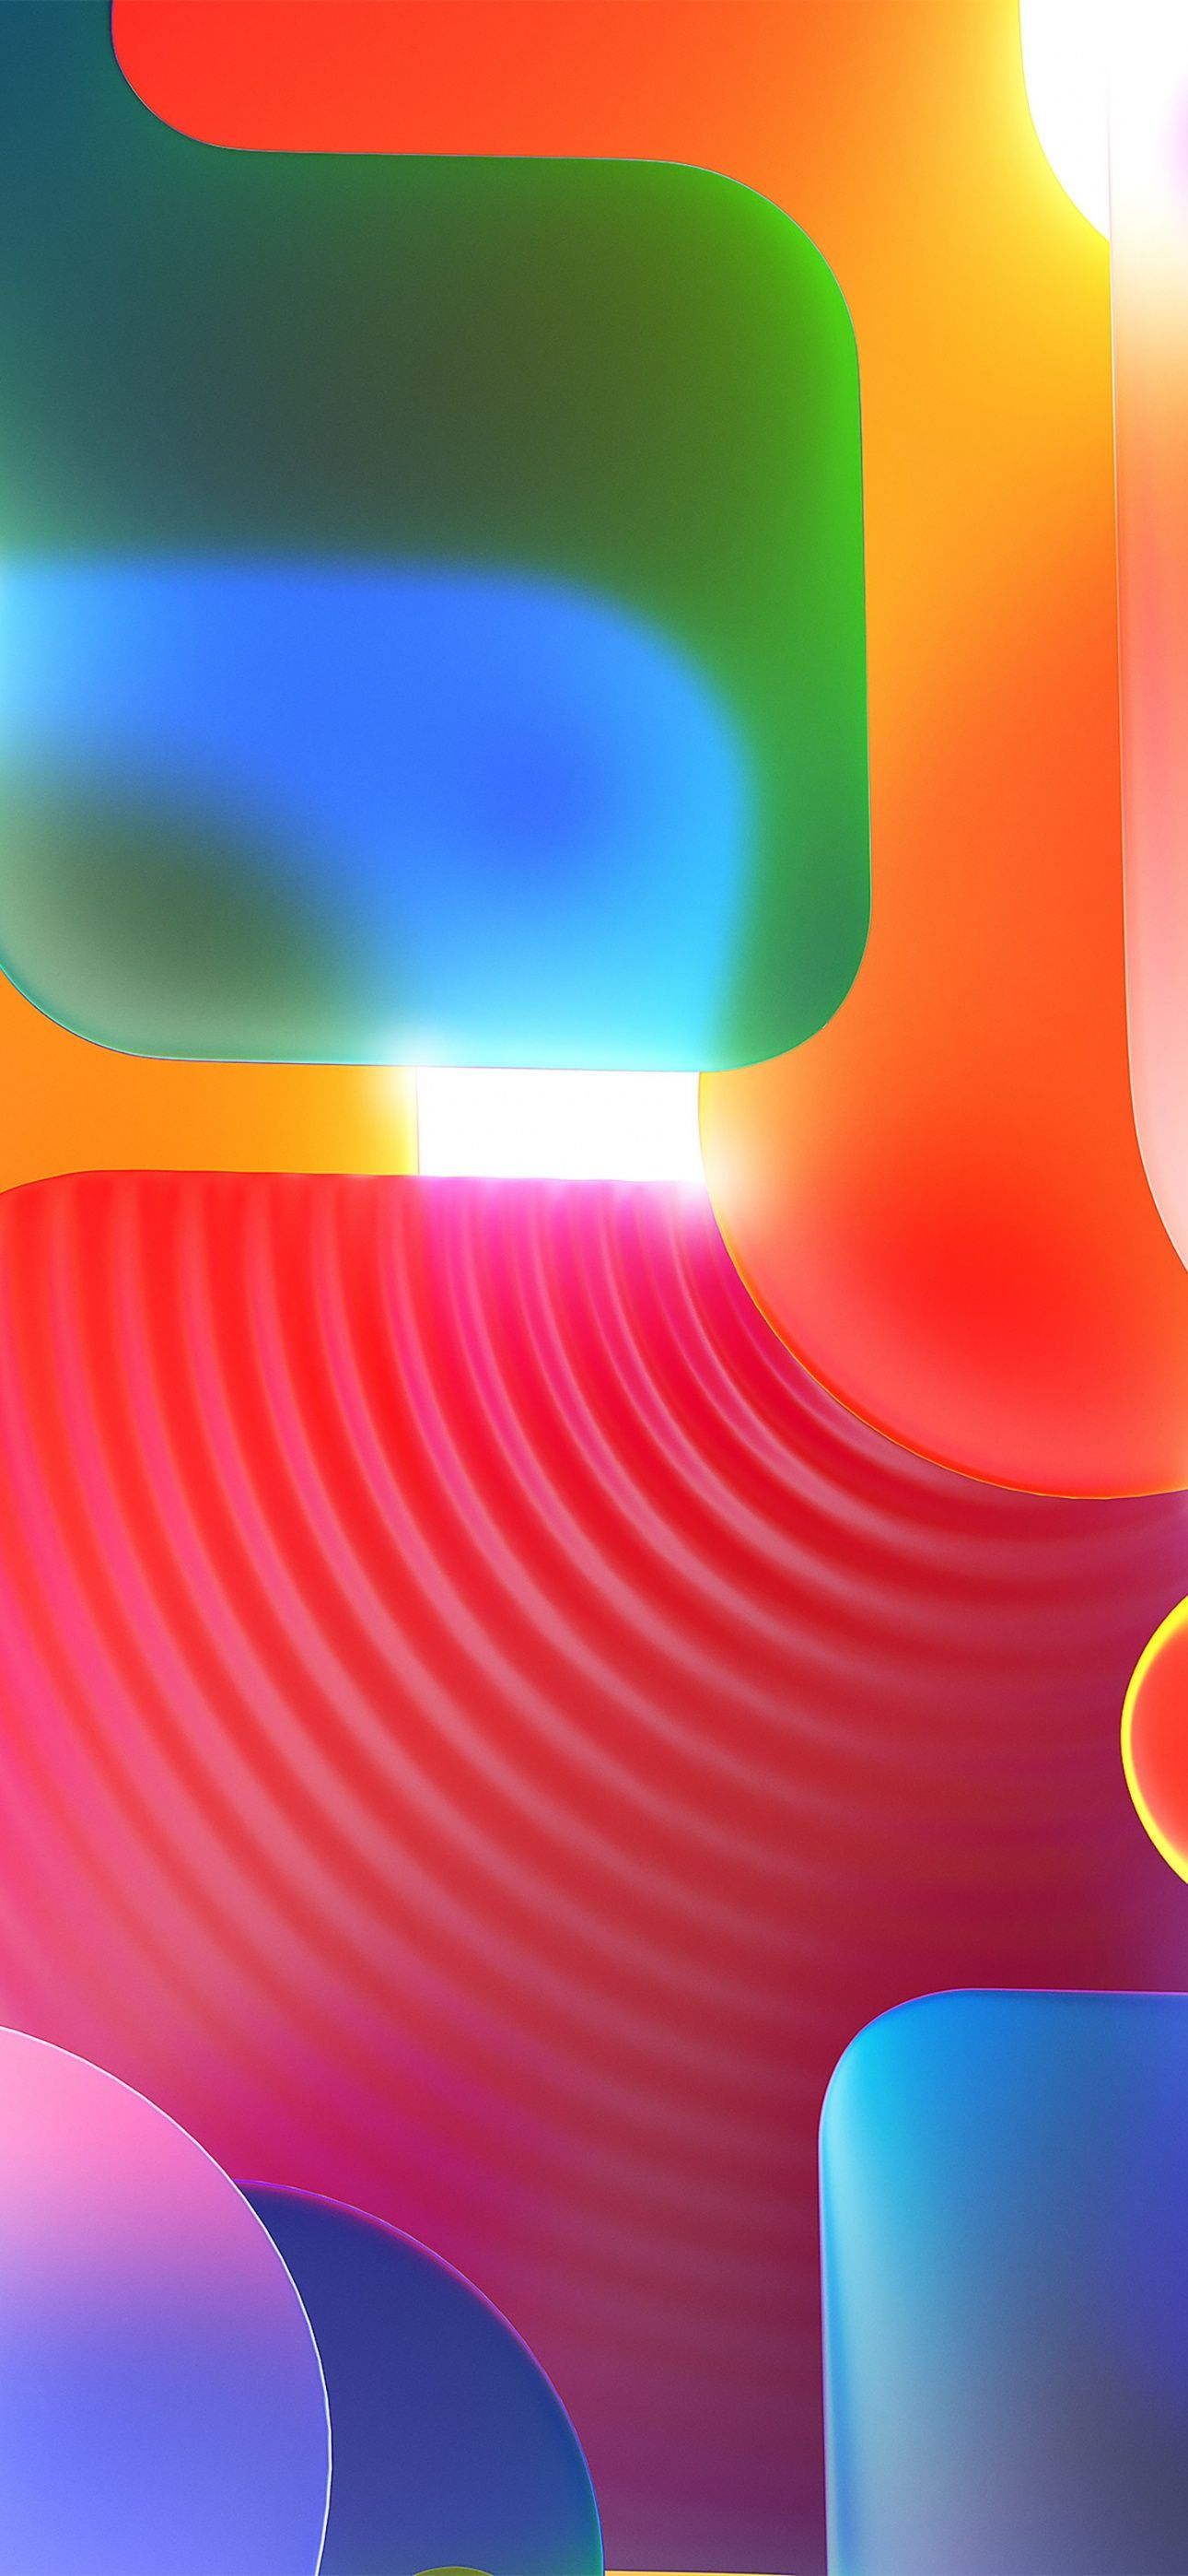 Wallpaper 1080x2340 abstract colorful shapes background for your iPhone X from Reddit - Colorful, candy, 3D